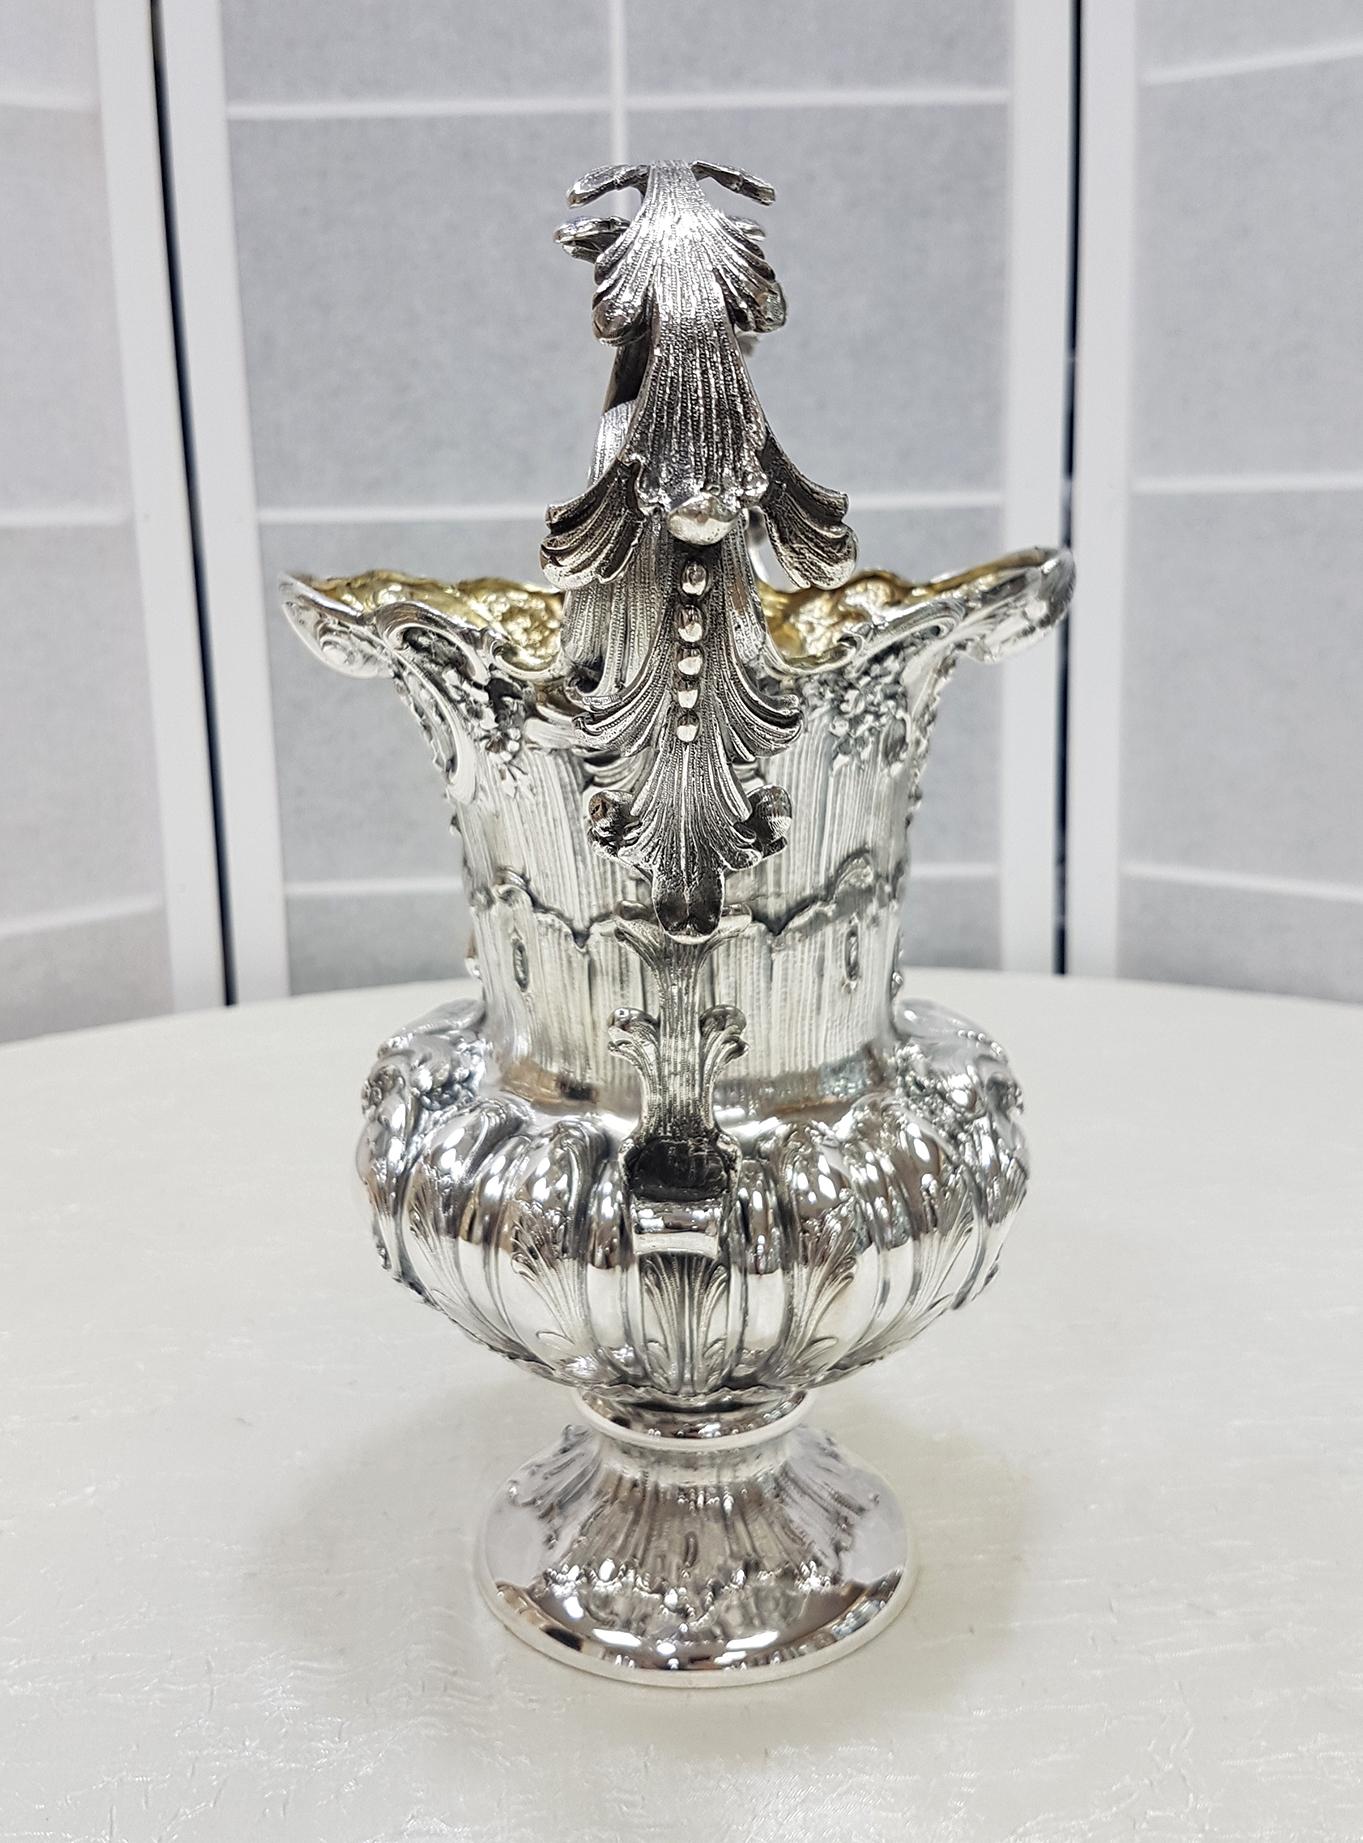 Gorgeous Italian solid silver vase. Body made in one piece without welding. Embossed and chiseled, of rare beauty and precision. Two important handles made of fusion and finely chiseled were welded onto the vase. The inside of the vase has been